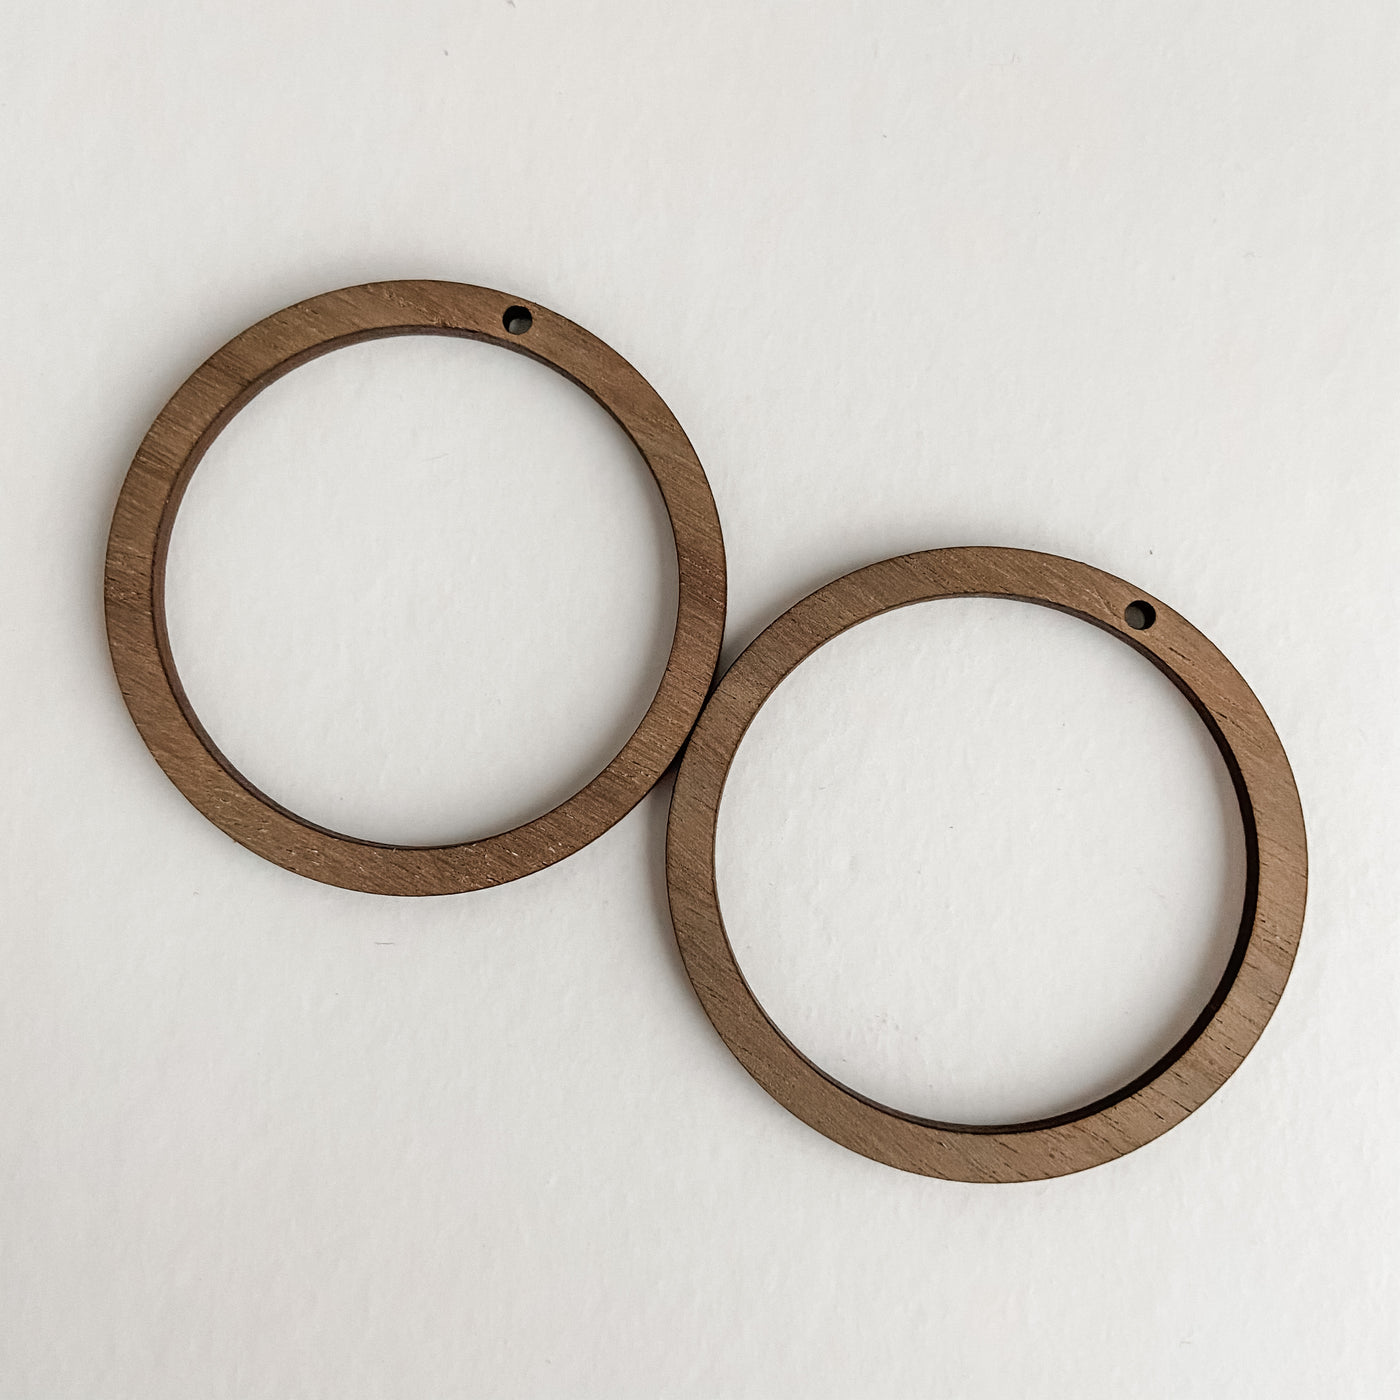 Accessories - Bamboo Earrings Large Circles